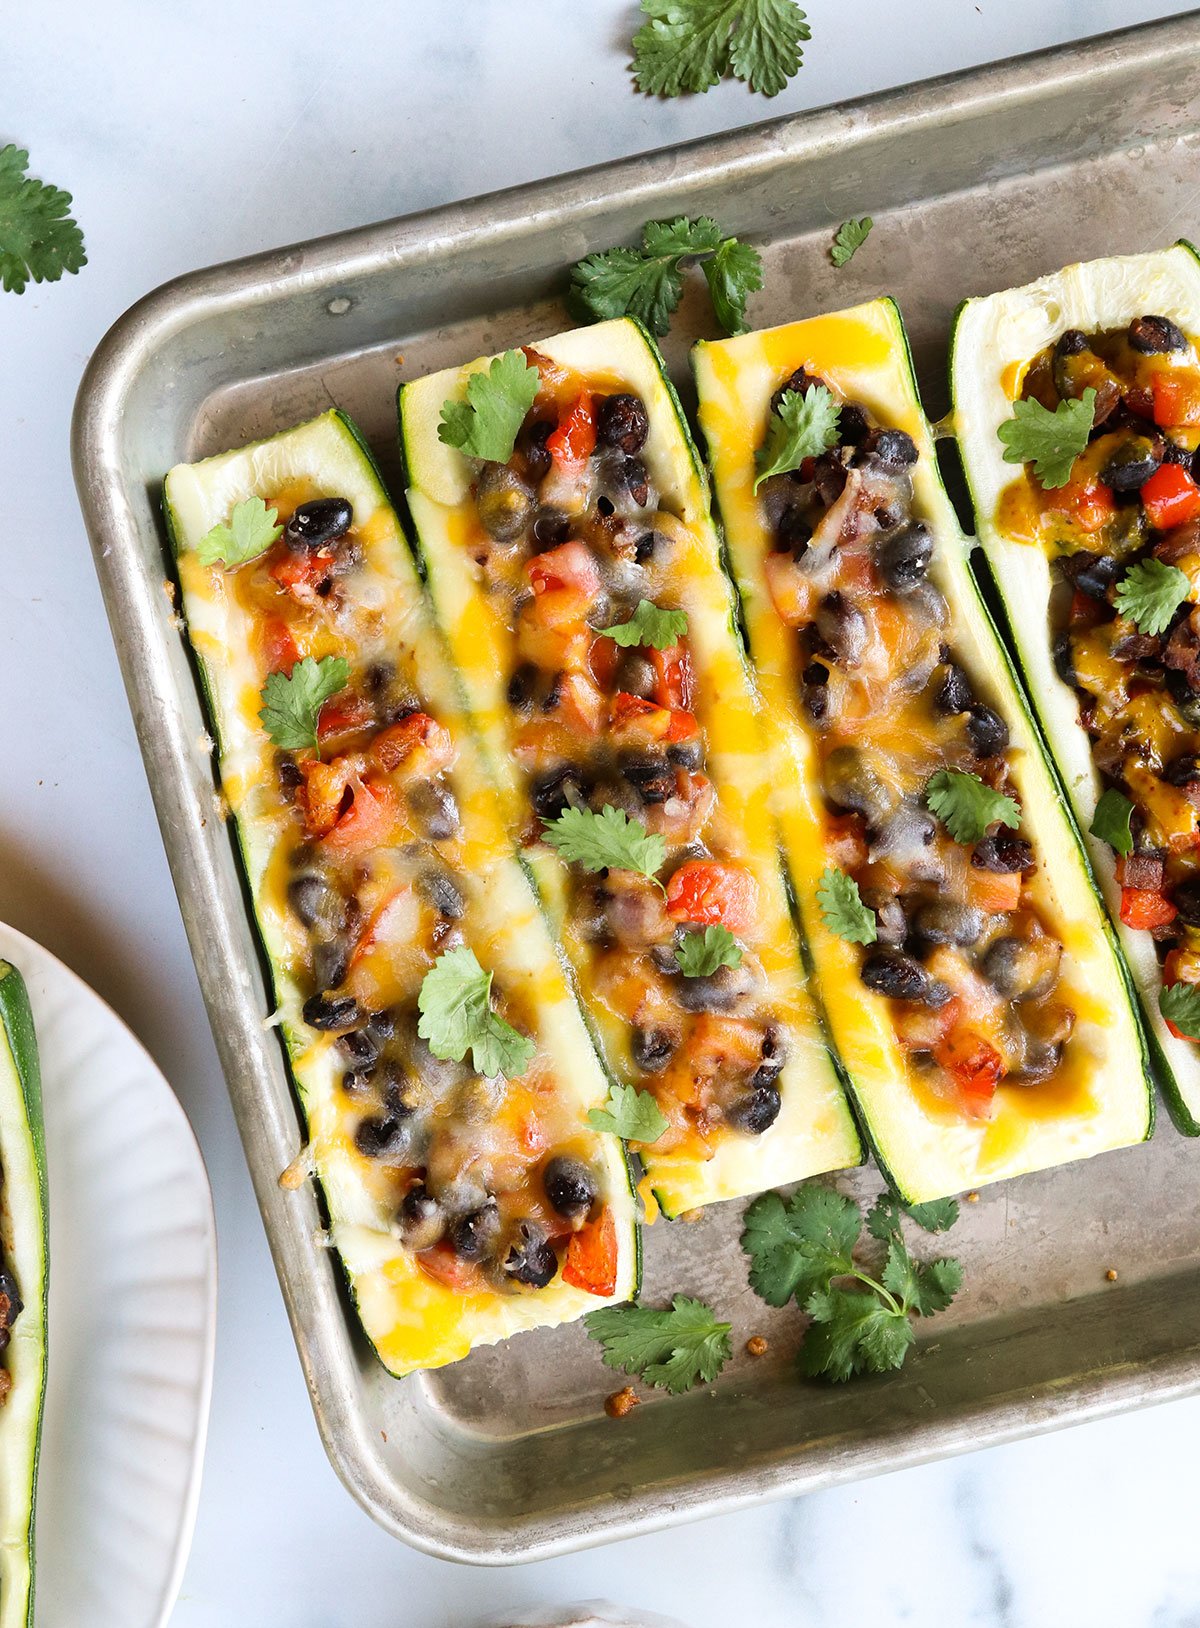 melted cheese on vegetarian zucchini boats.